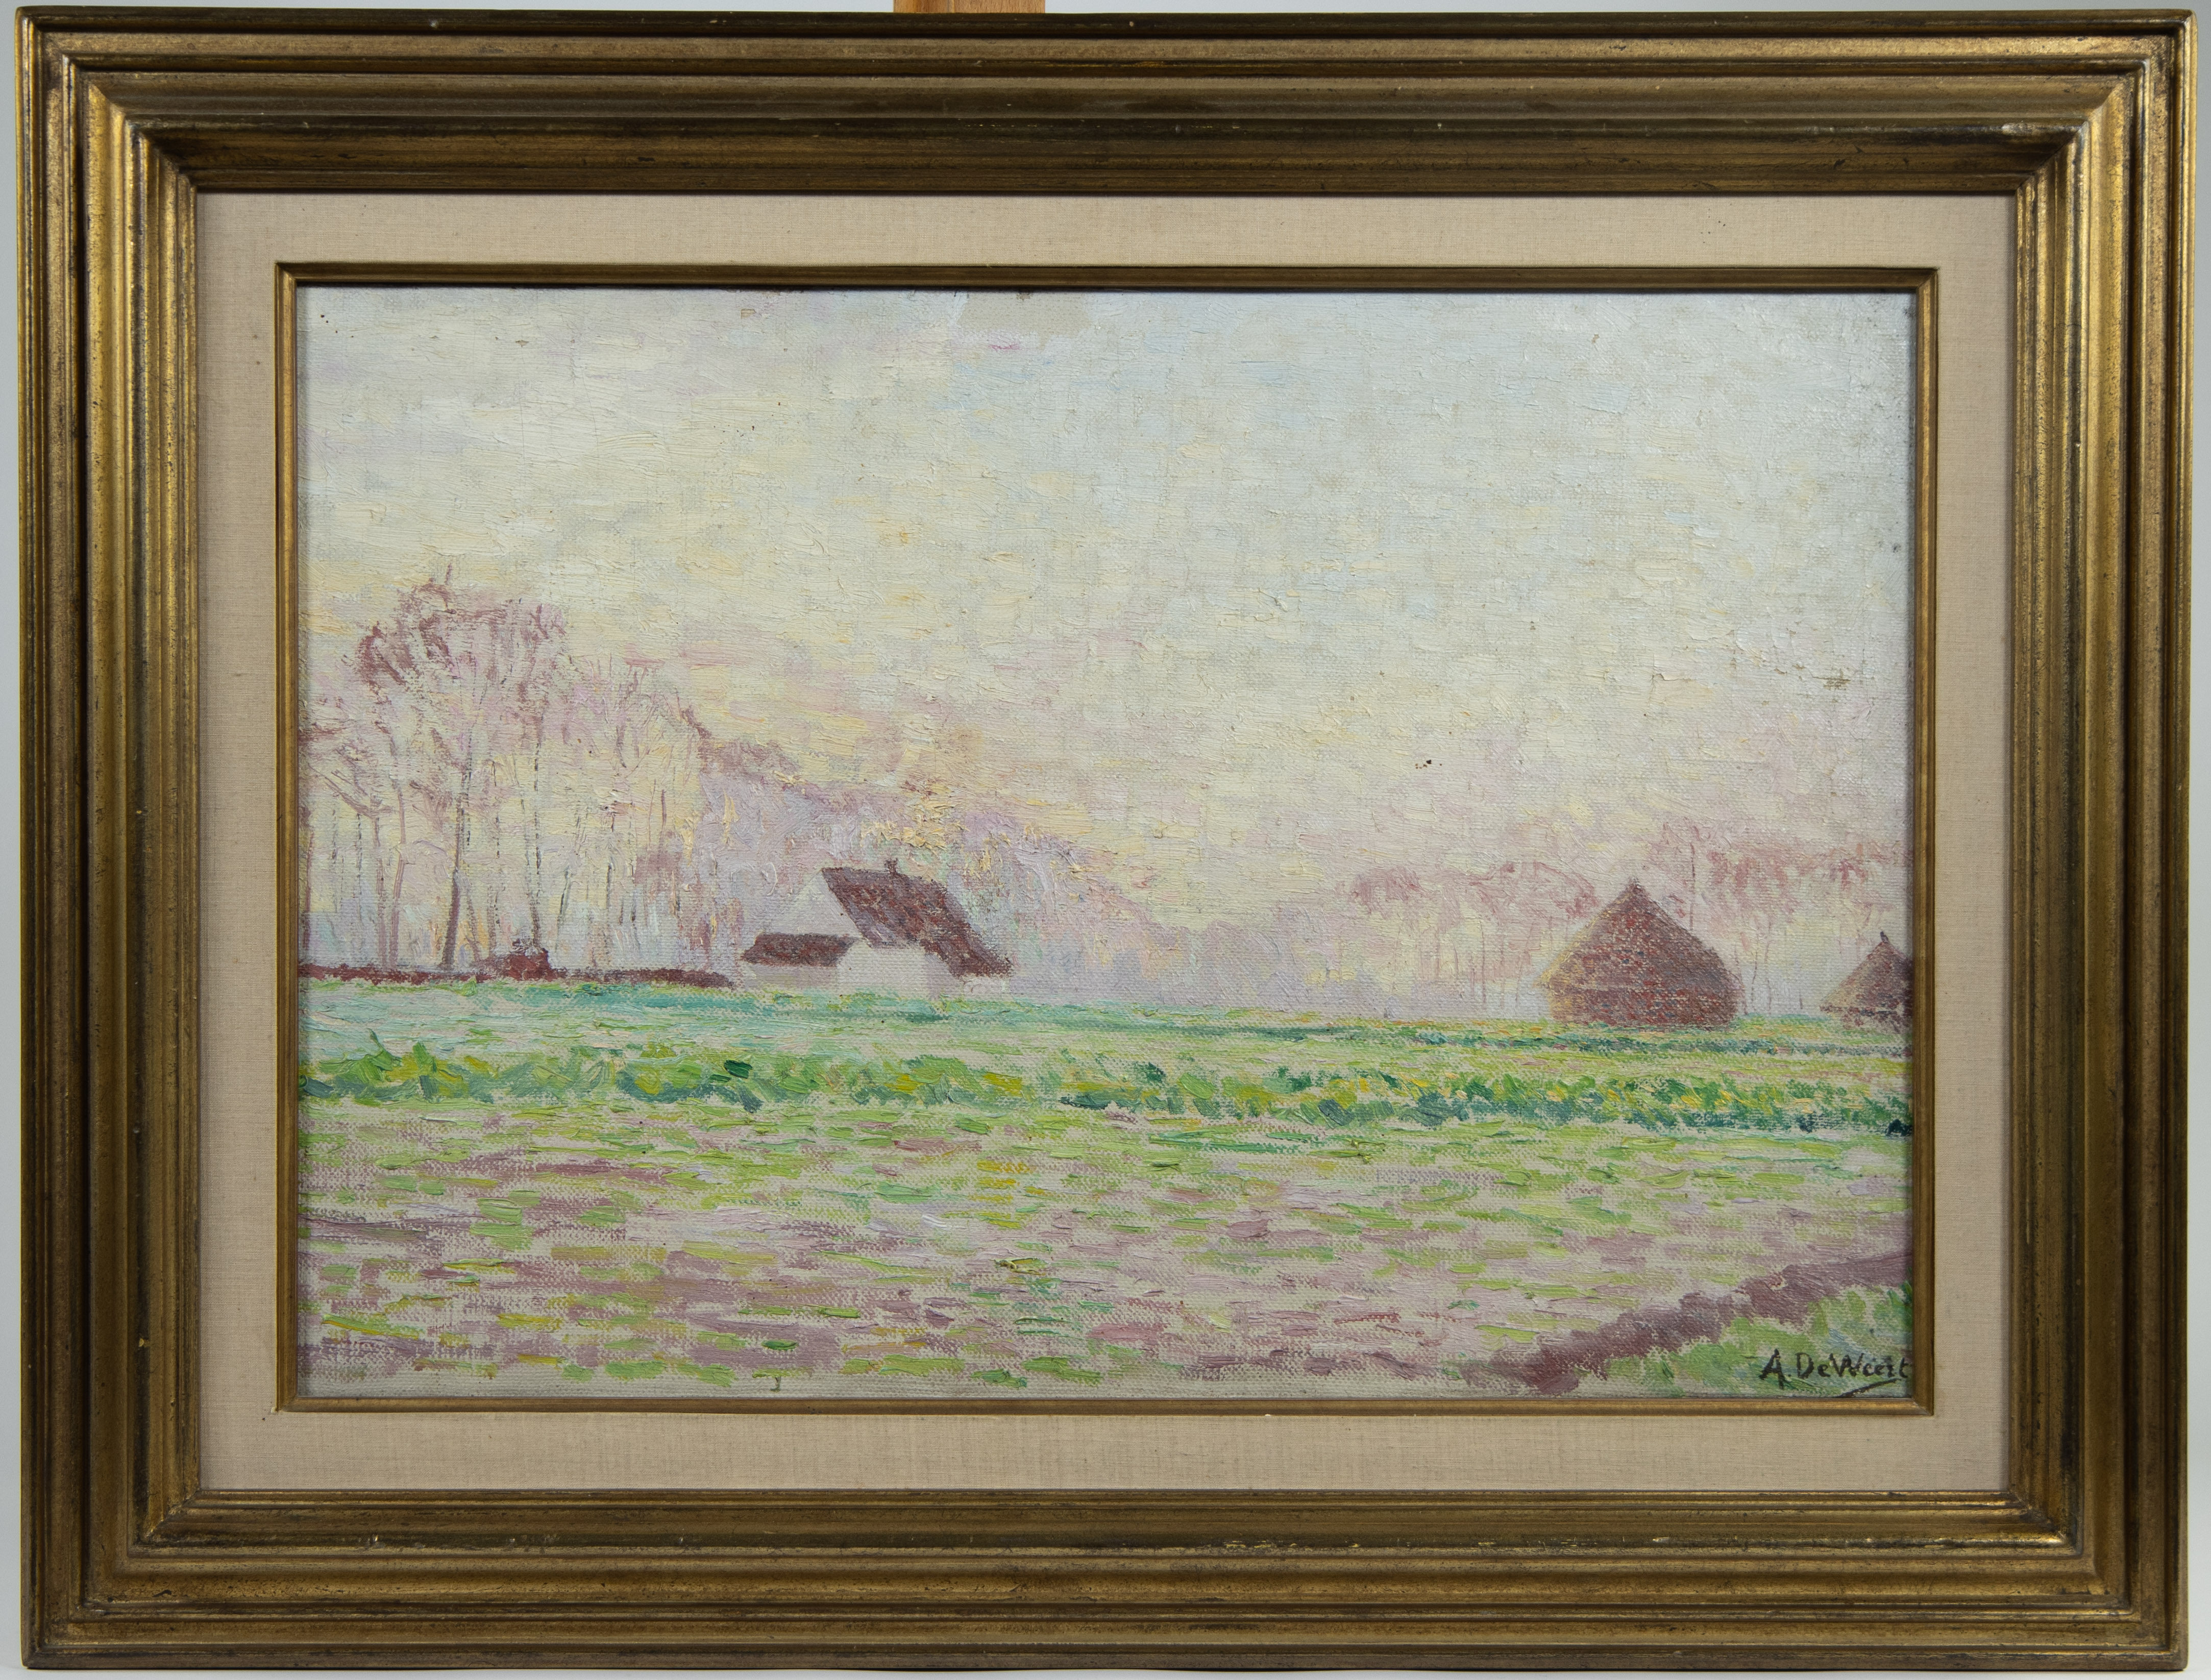 Anna DE WEERT (1867-1950), oil on canvas Landscape with haystacks, signed - Image 2 of 7